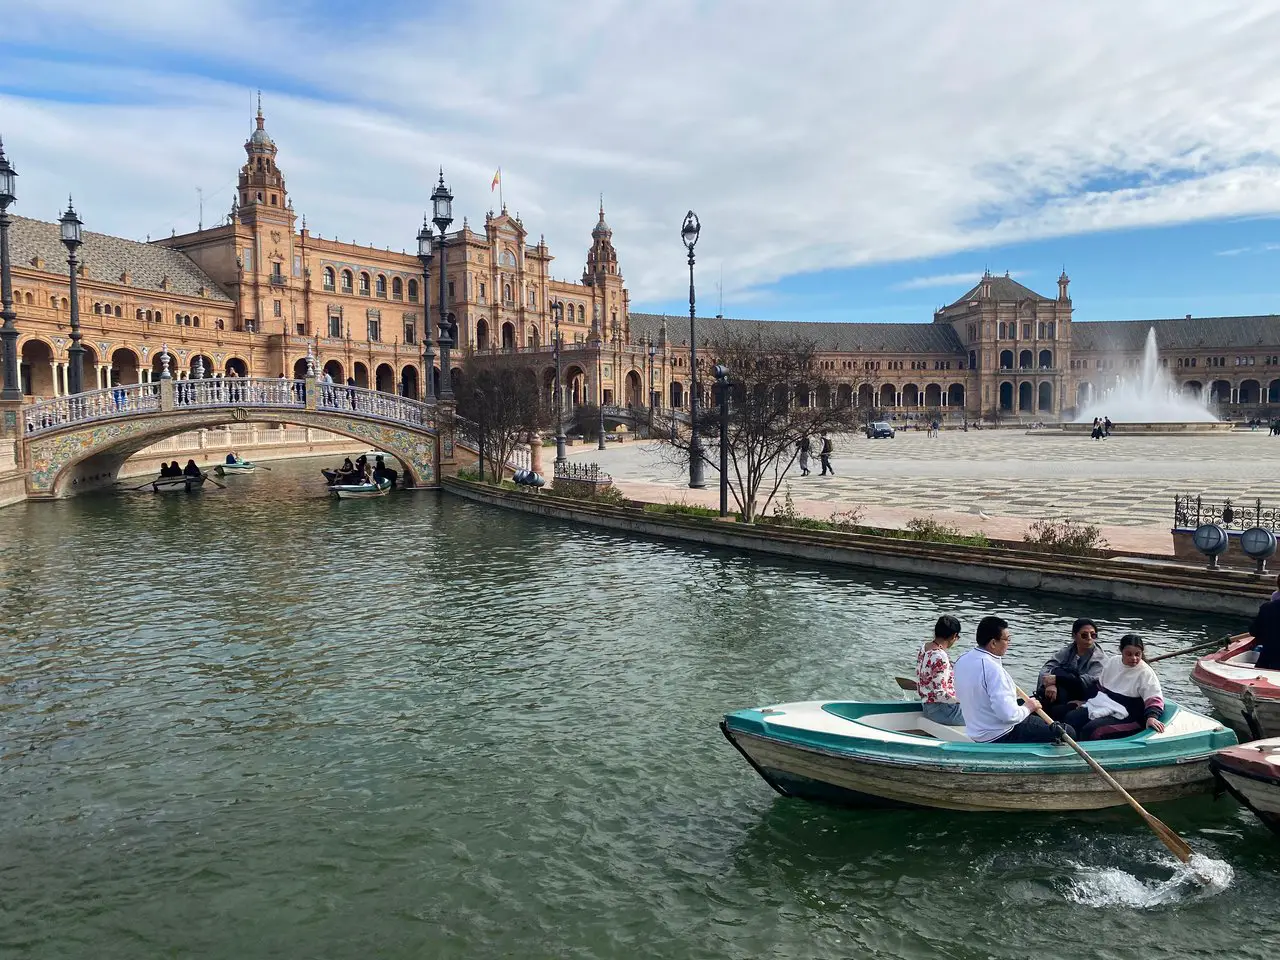 Plaza de Espana in Seville Spain. A bridge is standing over a small moat, and a man is rowing a boat in the moat.